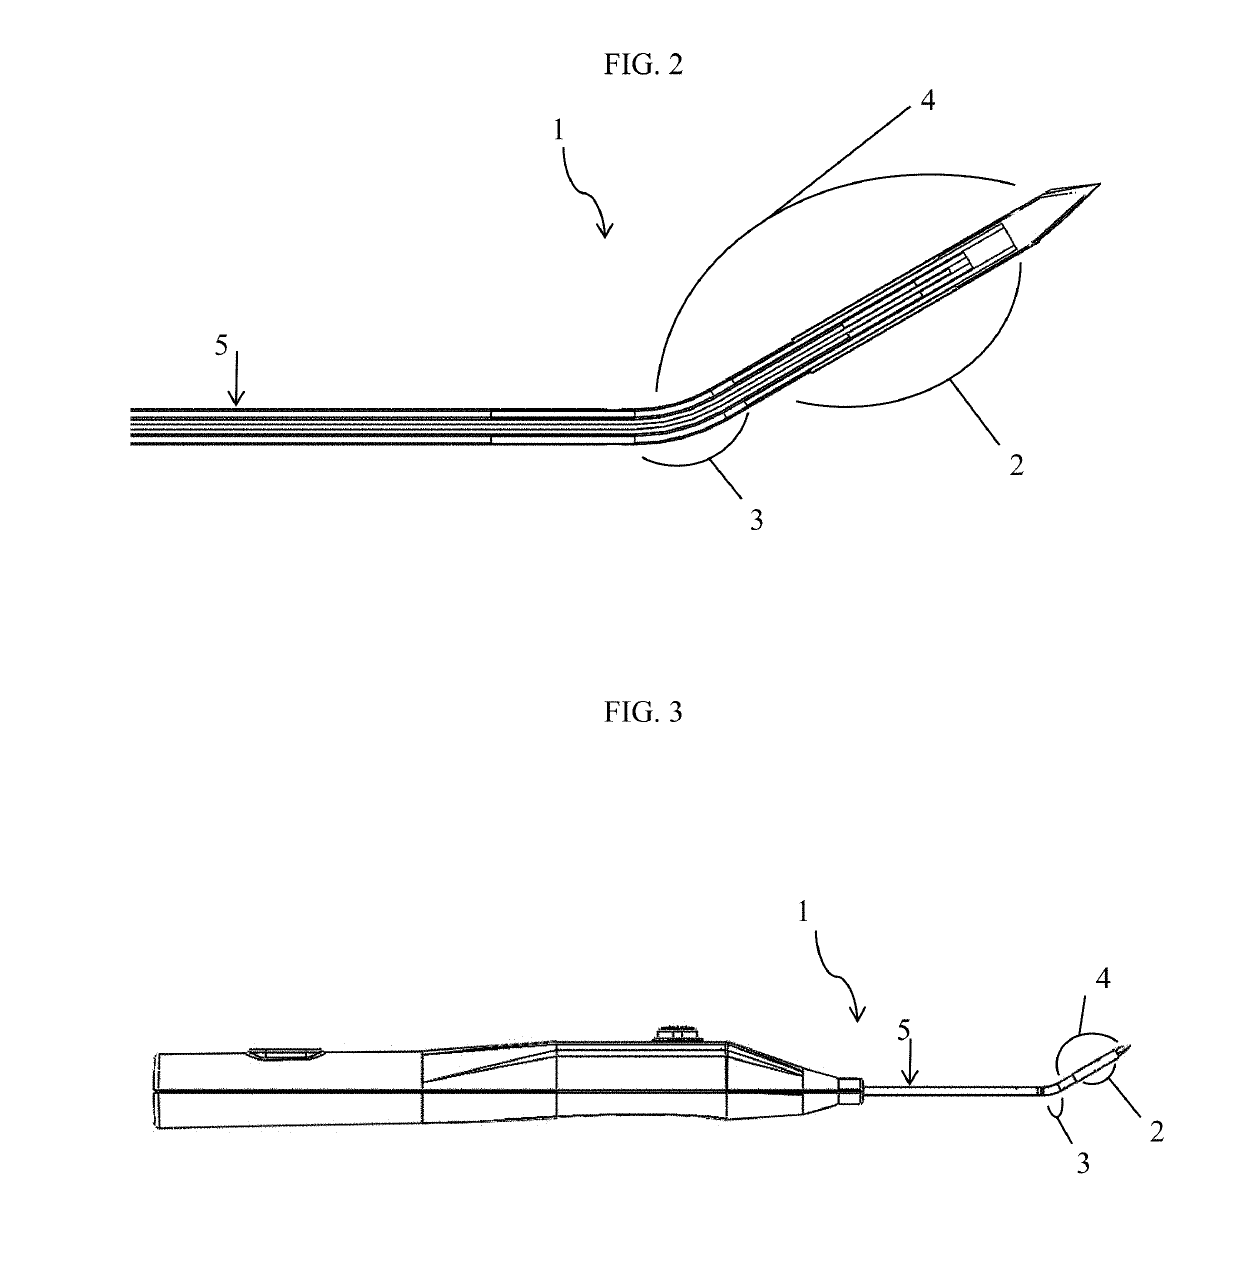 Energy delivery devices with flexible and adjustable tips